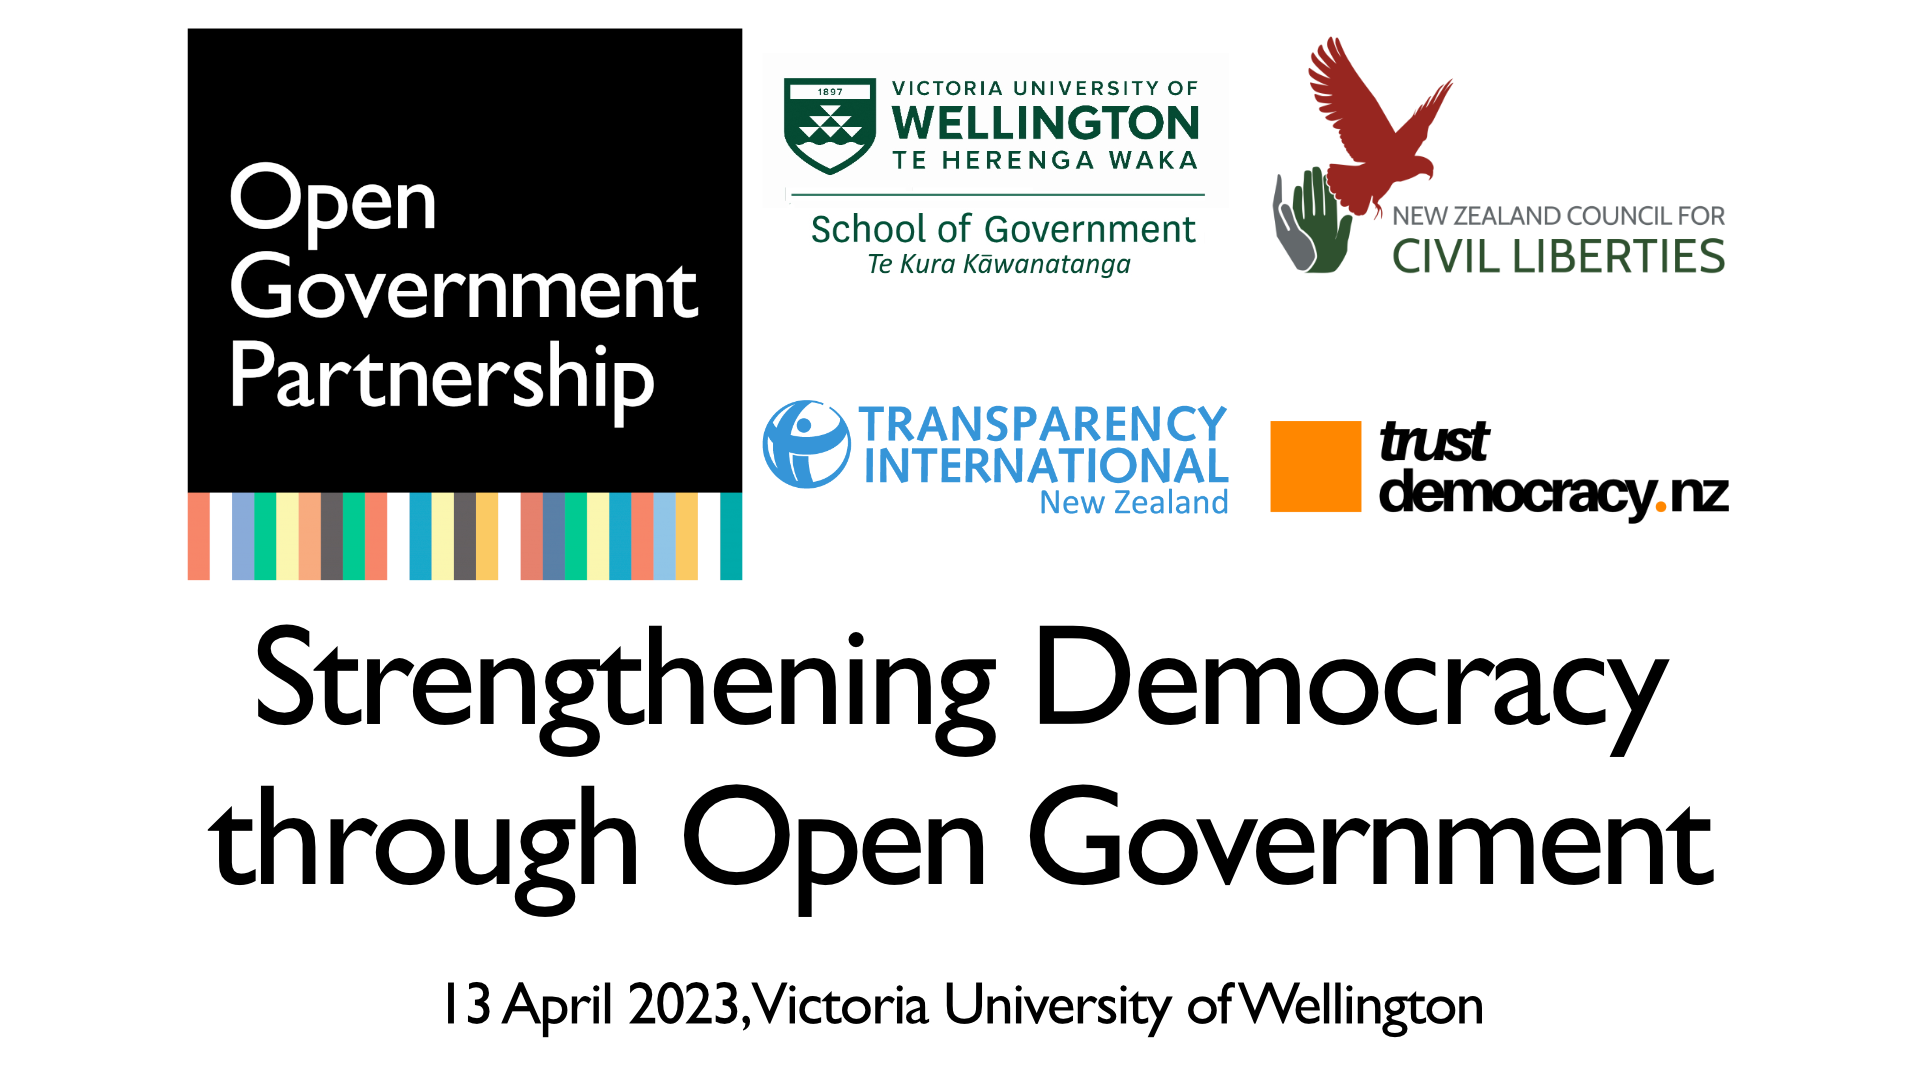 Logos NZCCL, Trust Democracy, Transparency International NZ, Victoria University of Wellington and the Open Government Partnership are positioned on a white background above the title of the event - Strengthening Democracy through Open Government. Below that is the date of the event 13 April and where it was held: Victoria University of Wellington